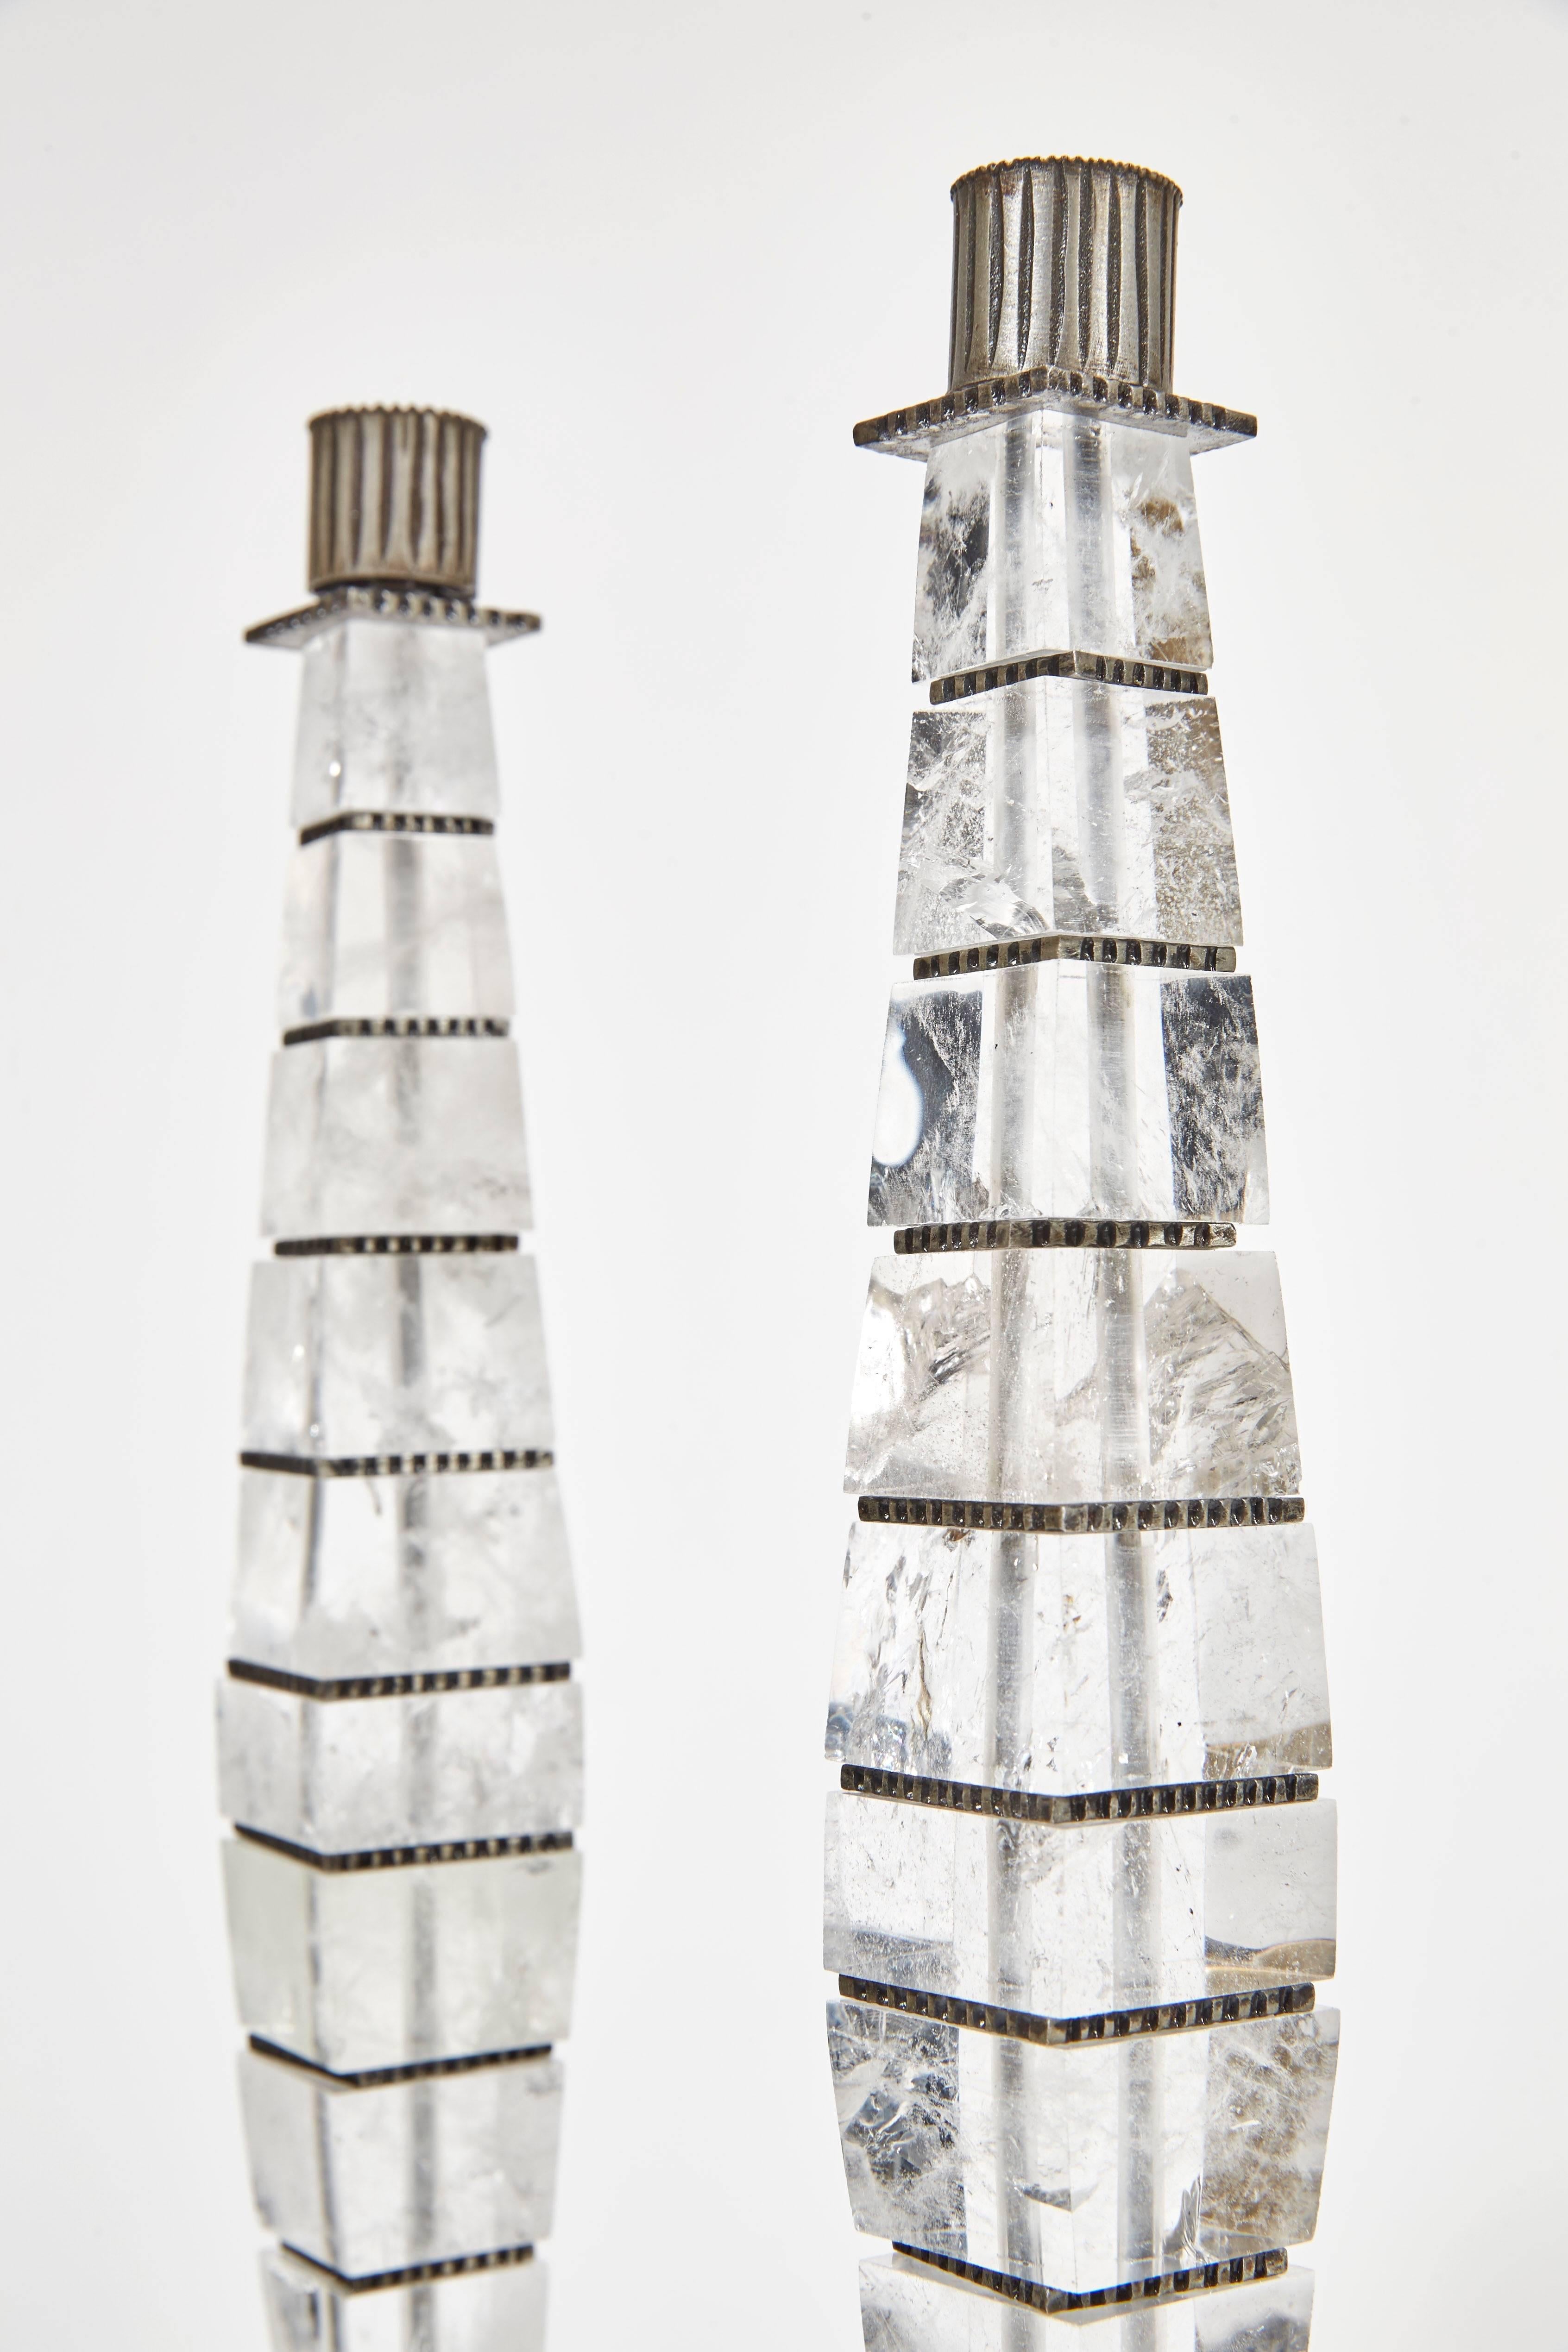 French A Pair of Square Candlesticks by Sylvain Subervie, 2003